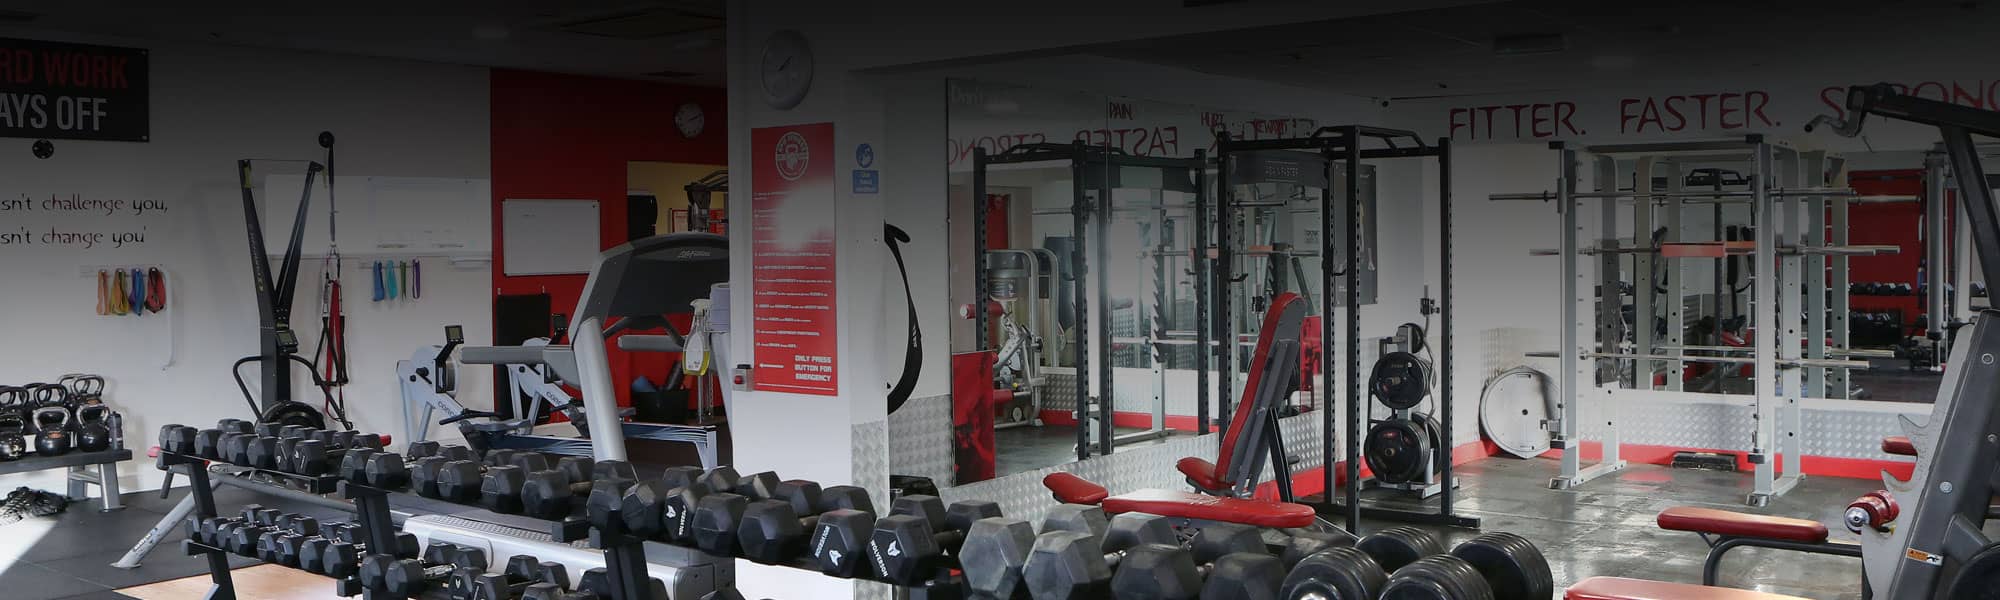 Dumbbells and weights area at RPM Fitness